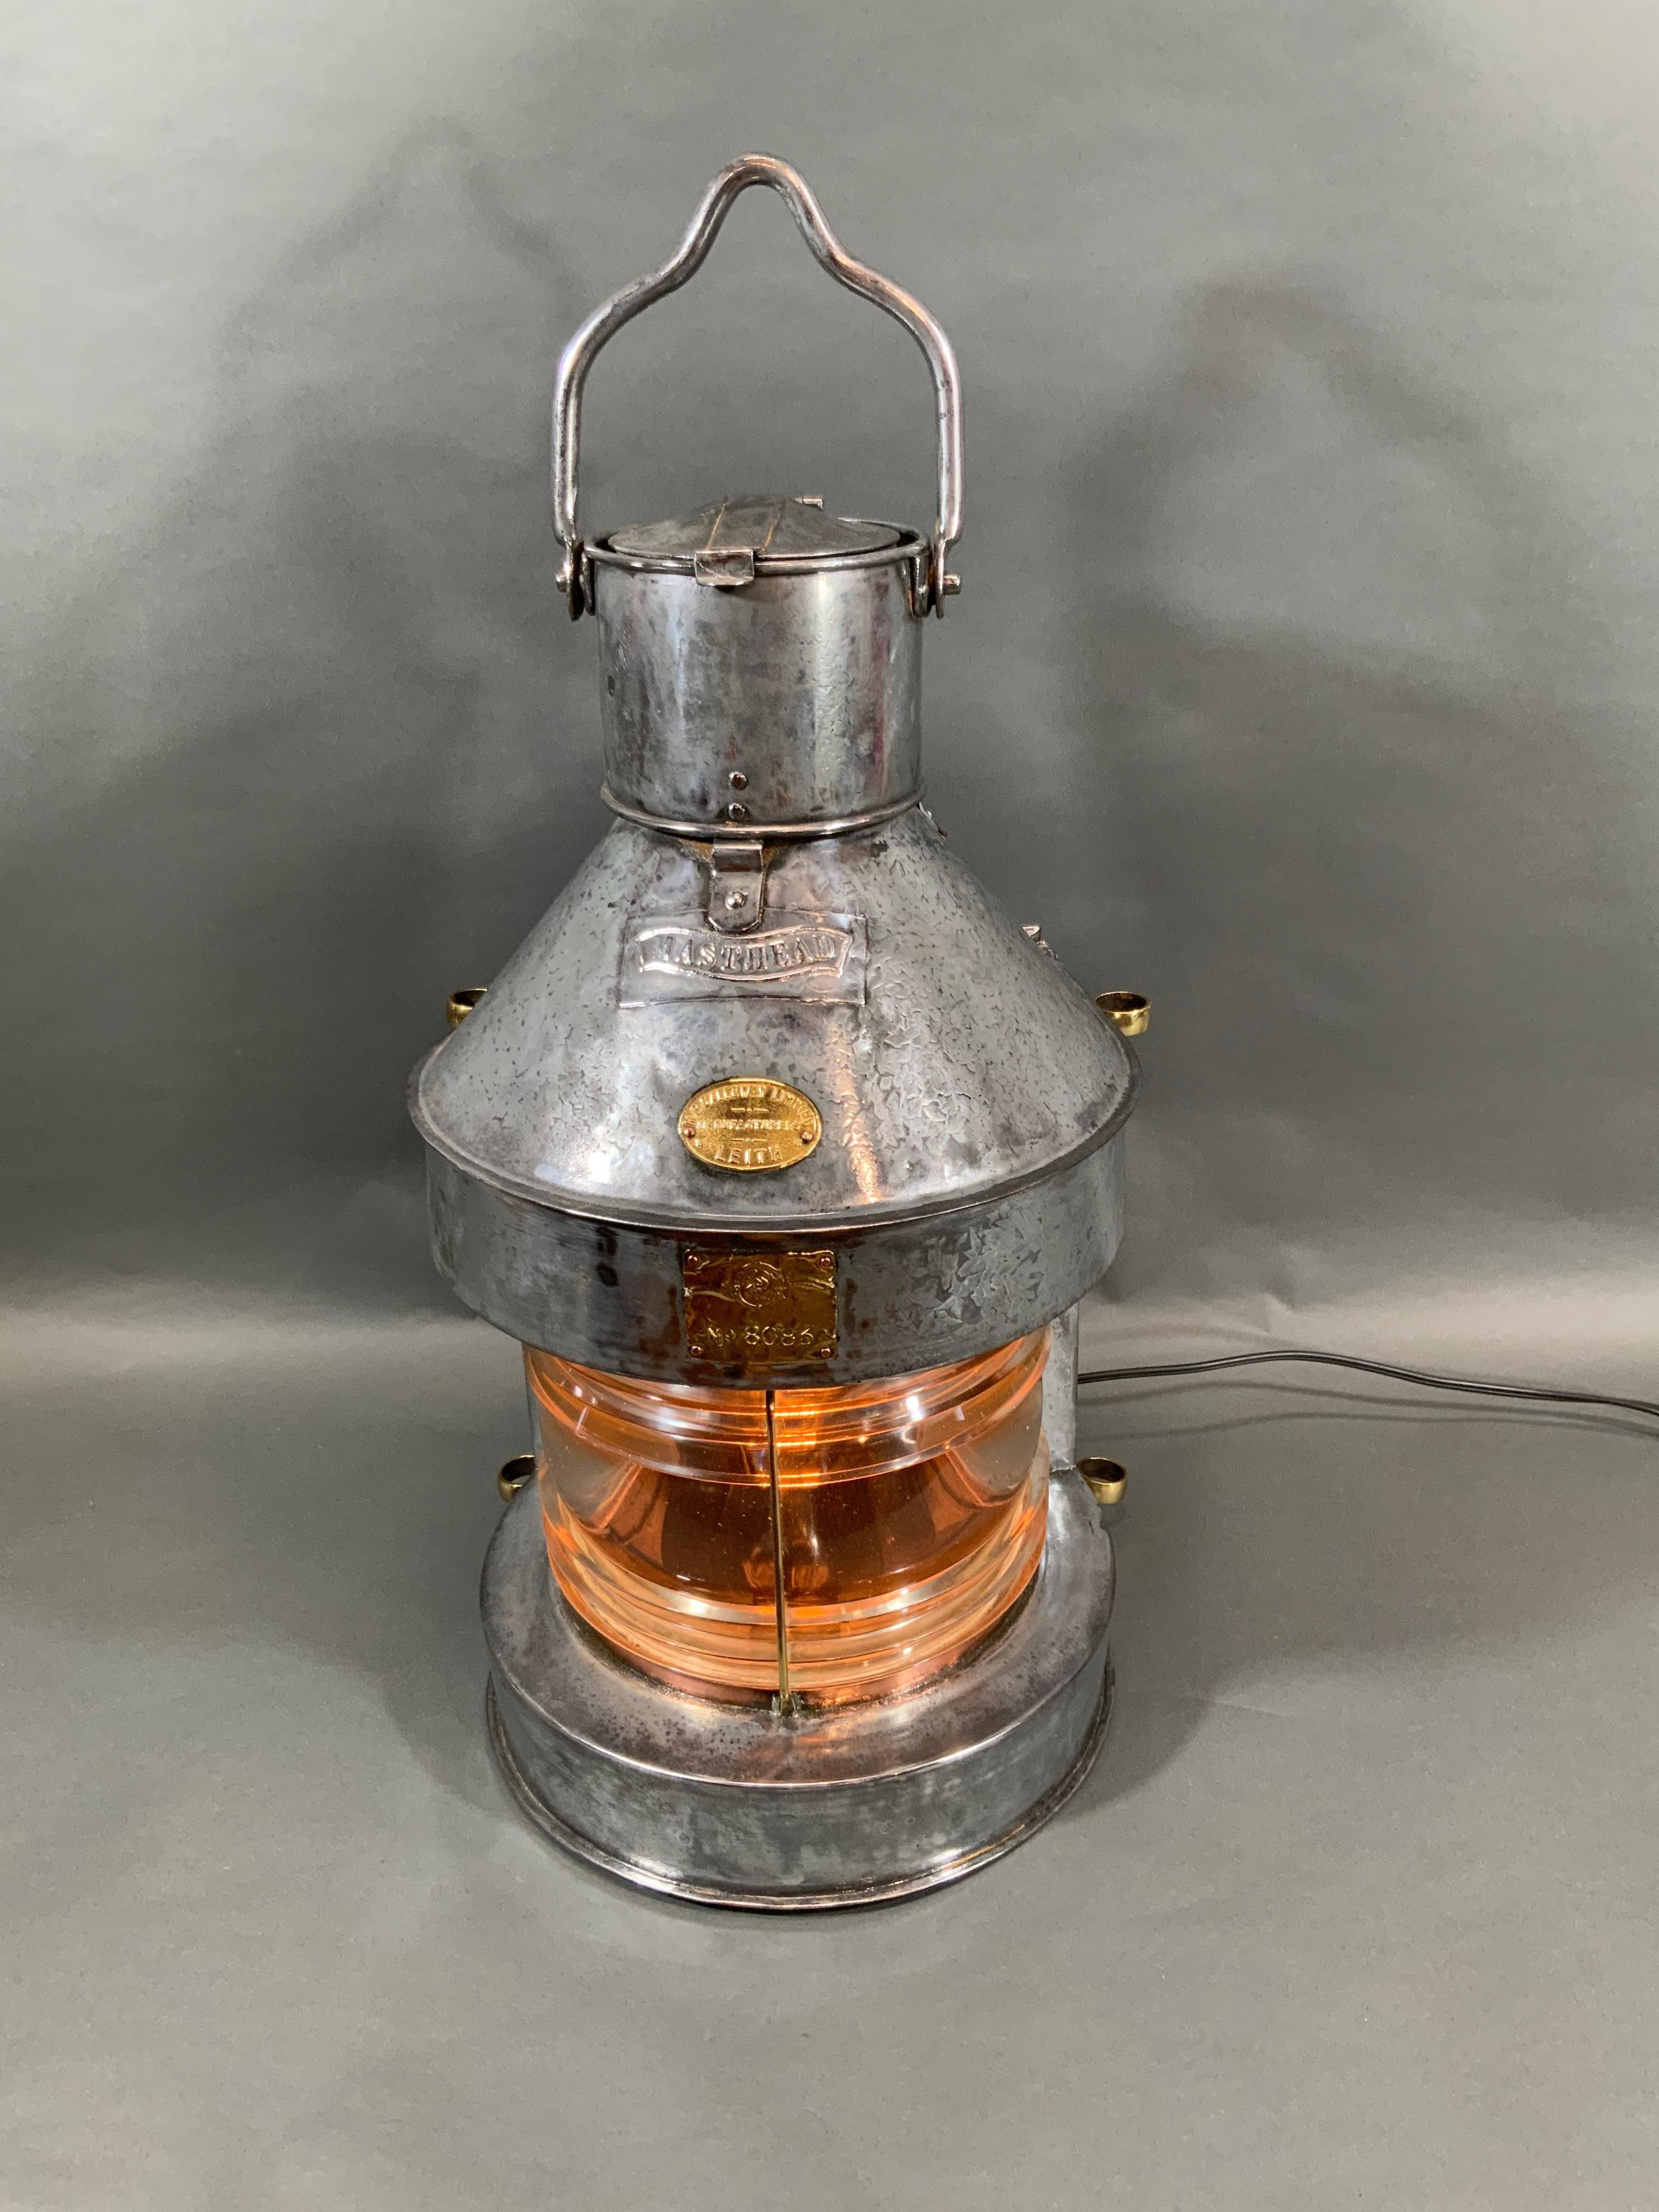 Ship's lantern by Scottish maker M.P. Calloway Limited Manufacturers of Leith. The steel case has been meticulously polished and lacquered. Fresnel glass lens with brass bezel. Heavy hoisting handle. Sliding rear panel. Wired with socket and wire